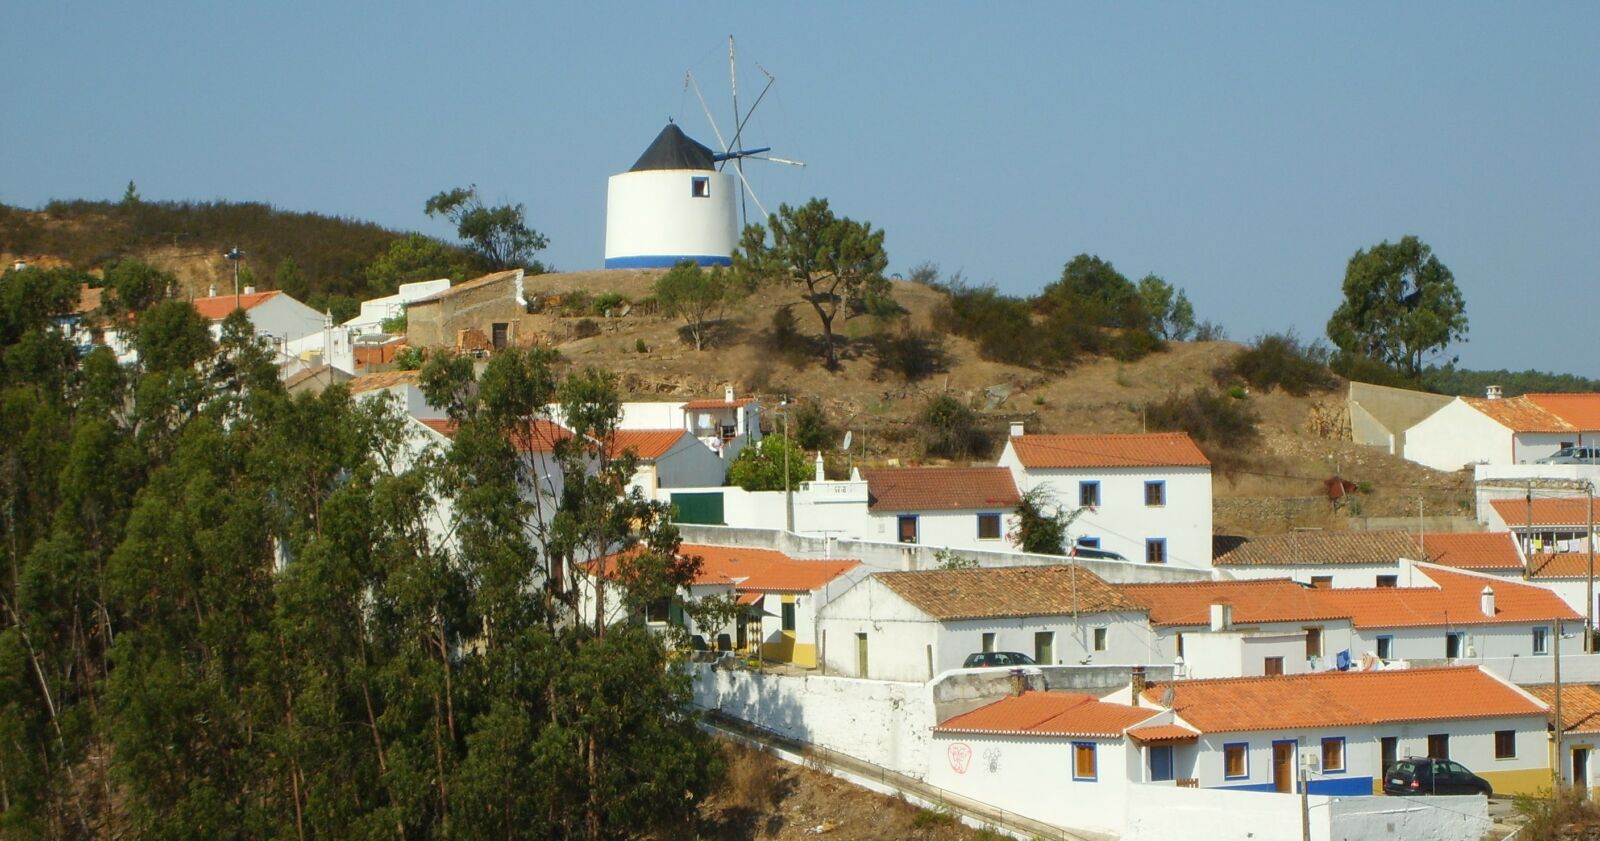 Windmill, houses